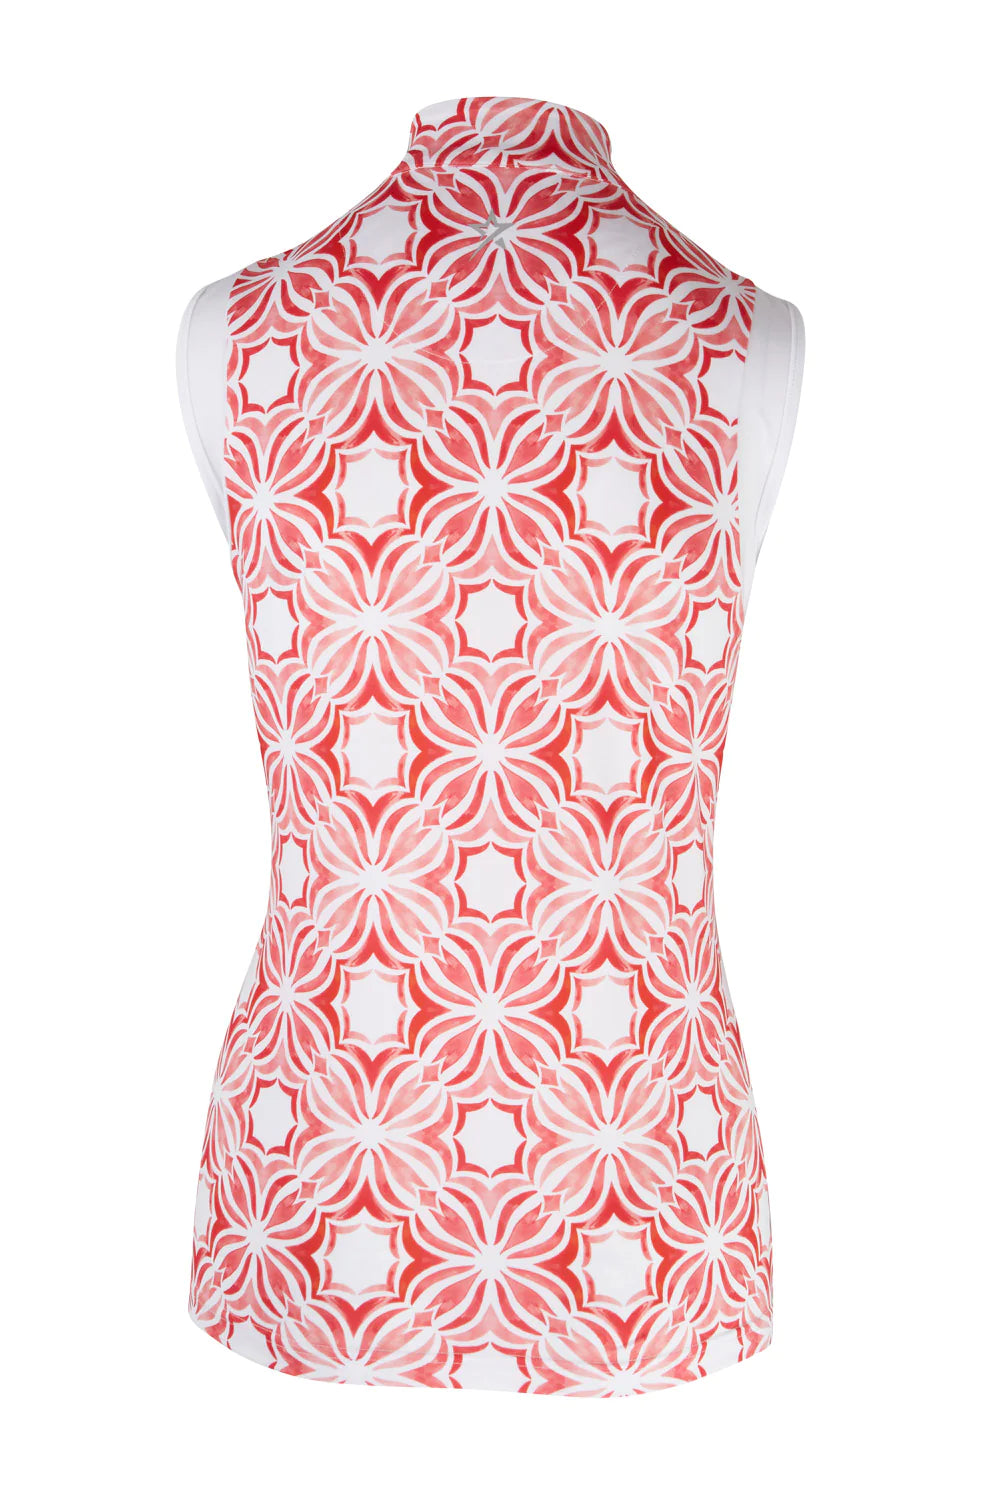 Swing Out Sister Serena Sleeveless - Code Red